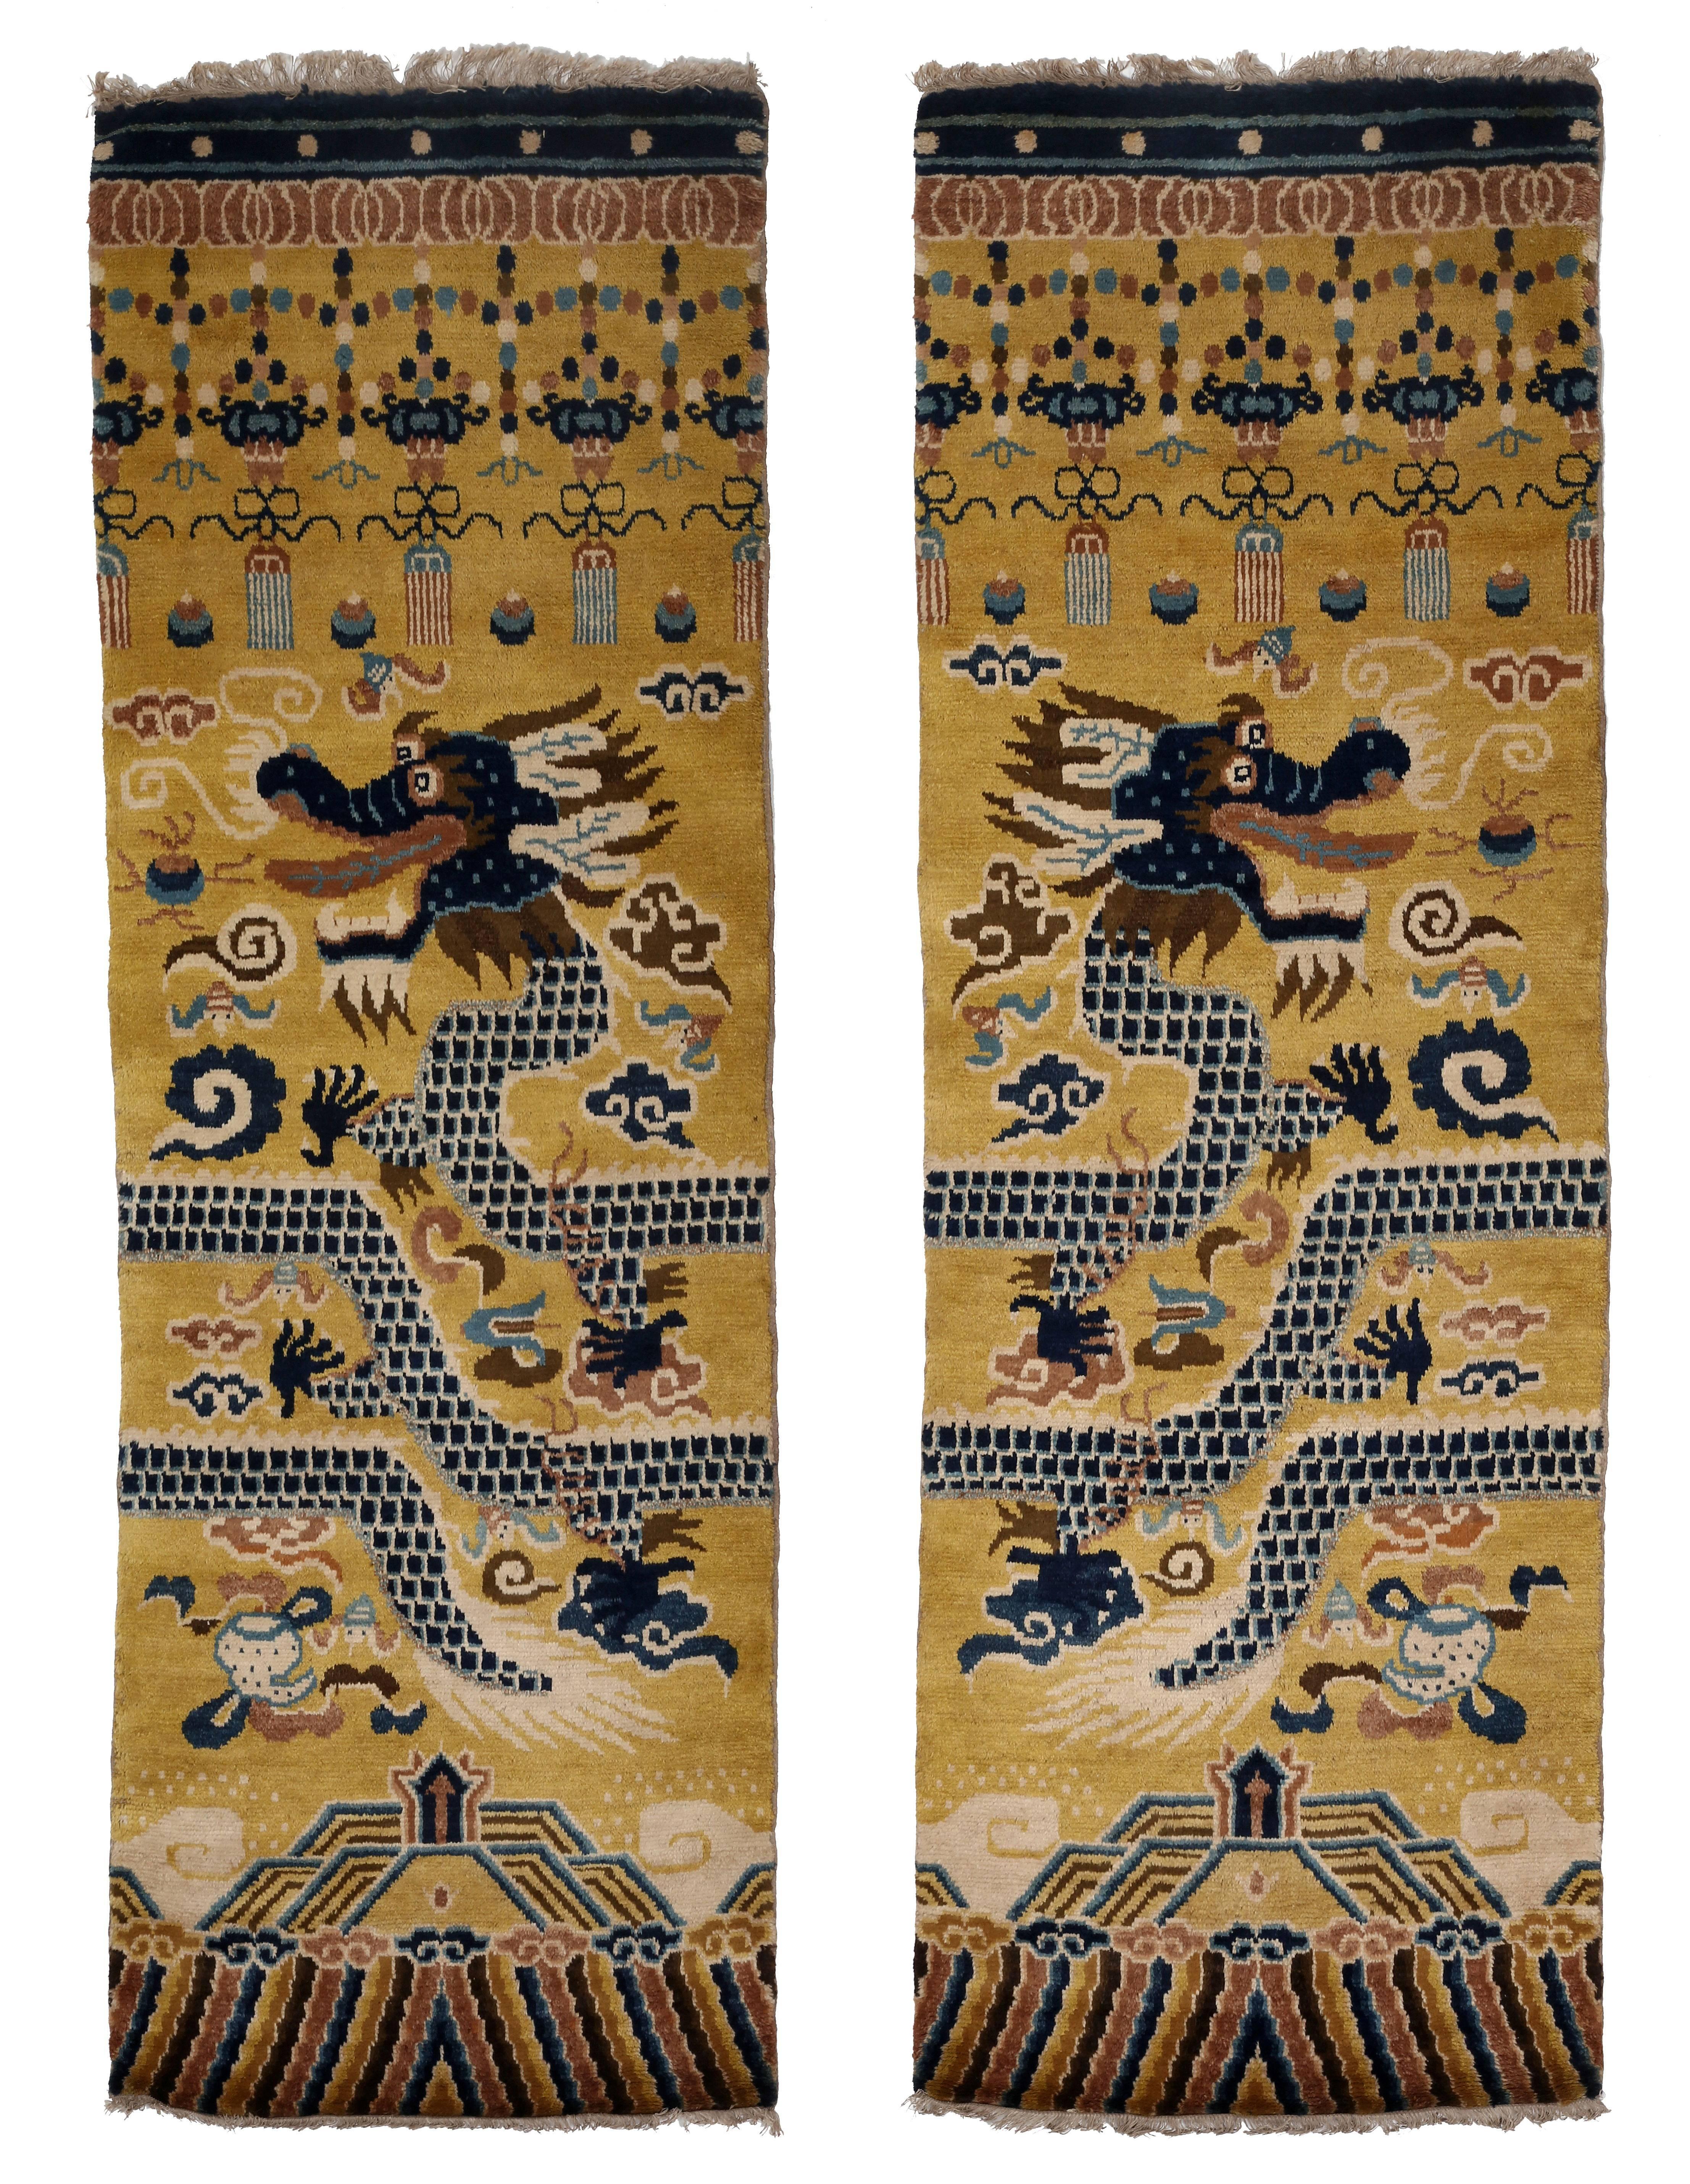 The fine pair of pillar carpets is hand-knotted and woven in the Ningxia style. The autonomous Province of Ningxia shares borders with Mongolia and has a mainly Muslim population thus giving it a rich carpet tradition and access to superb wool. This